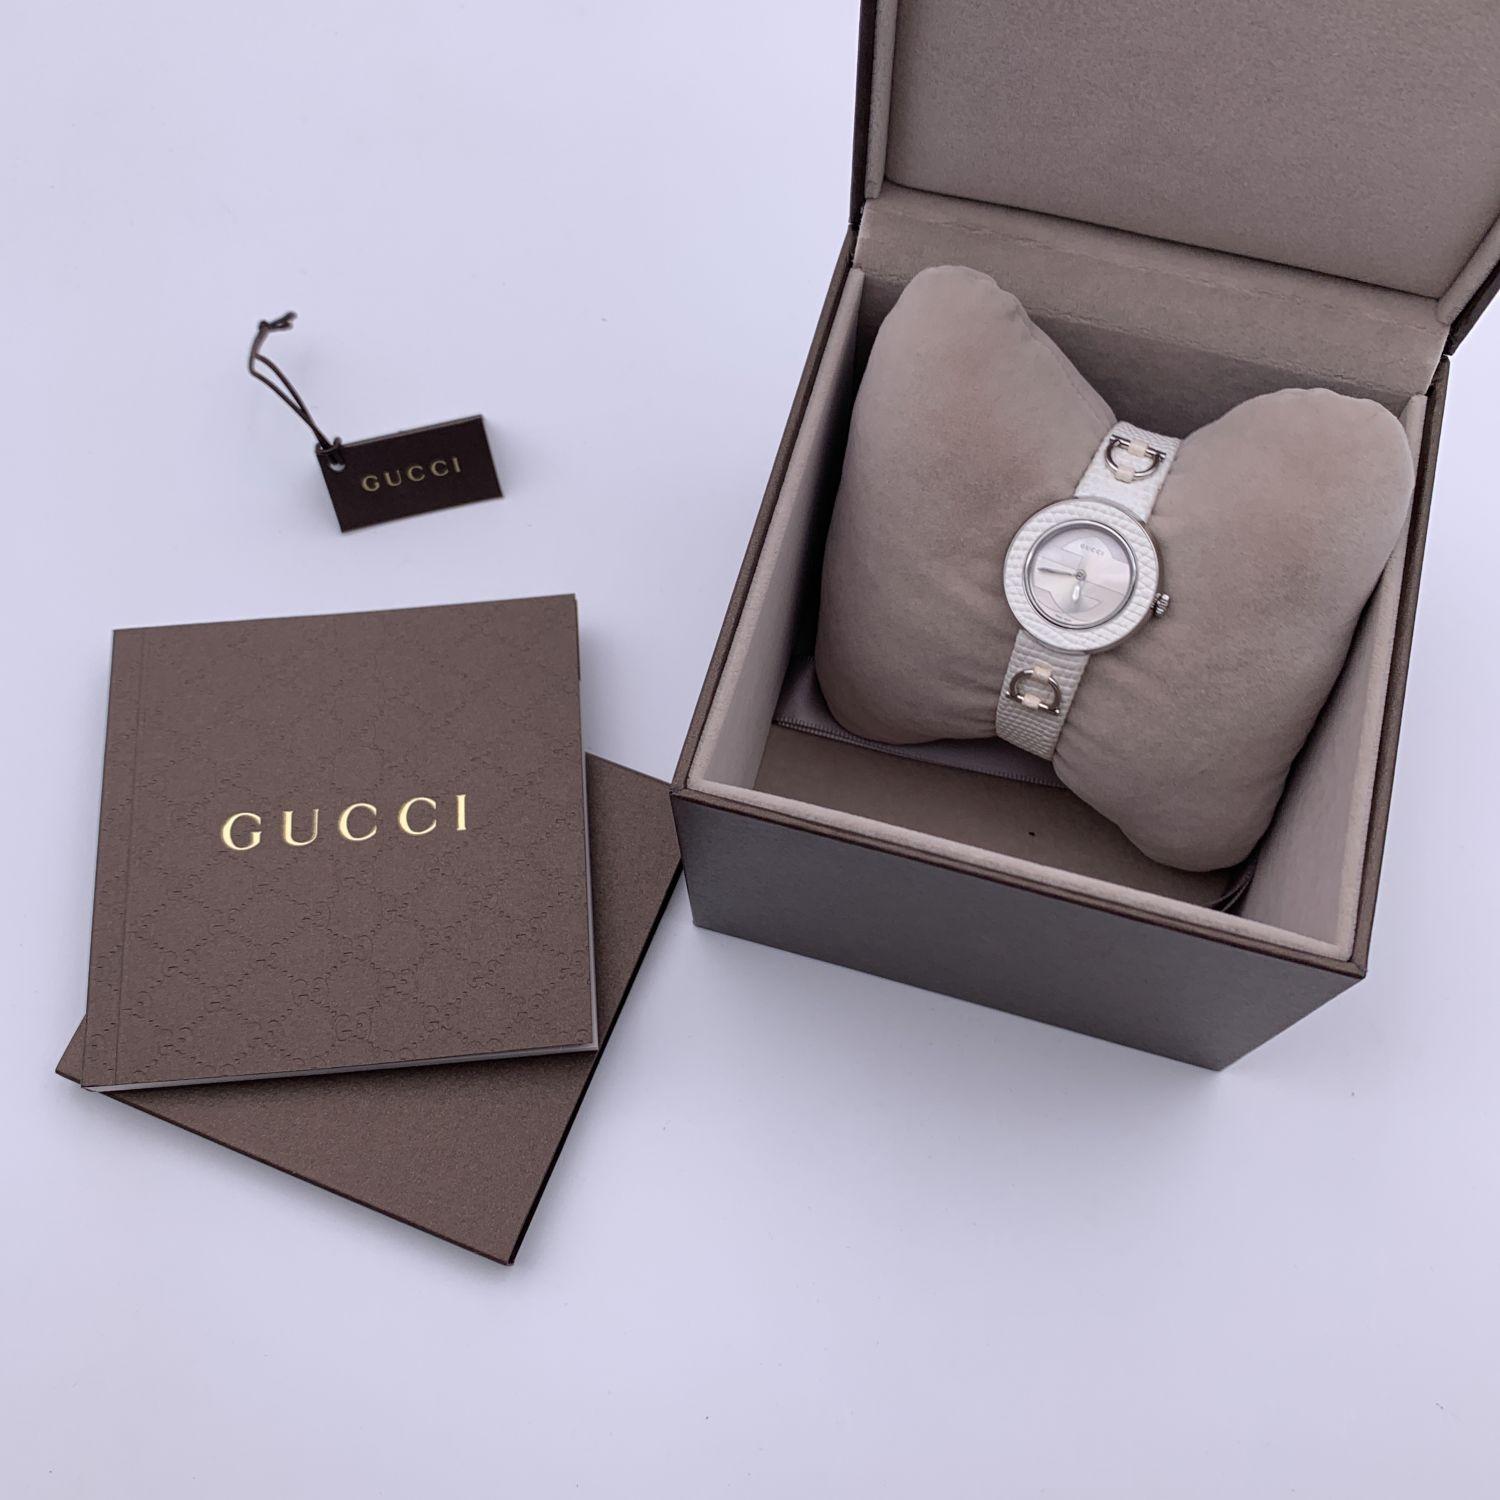 Gucci White Leather Stainless Steel 129.5 Quartz Wrist Watch 1